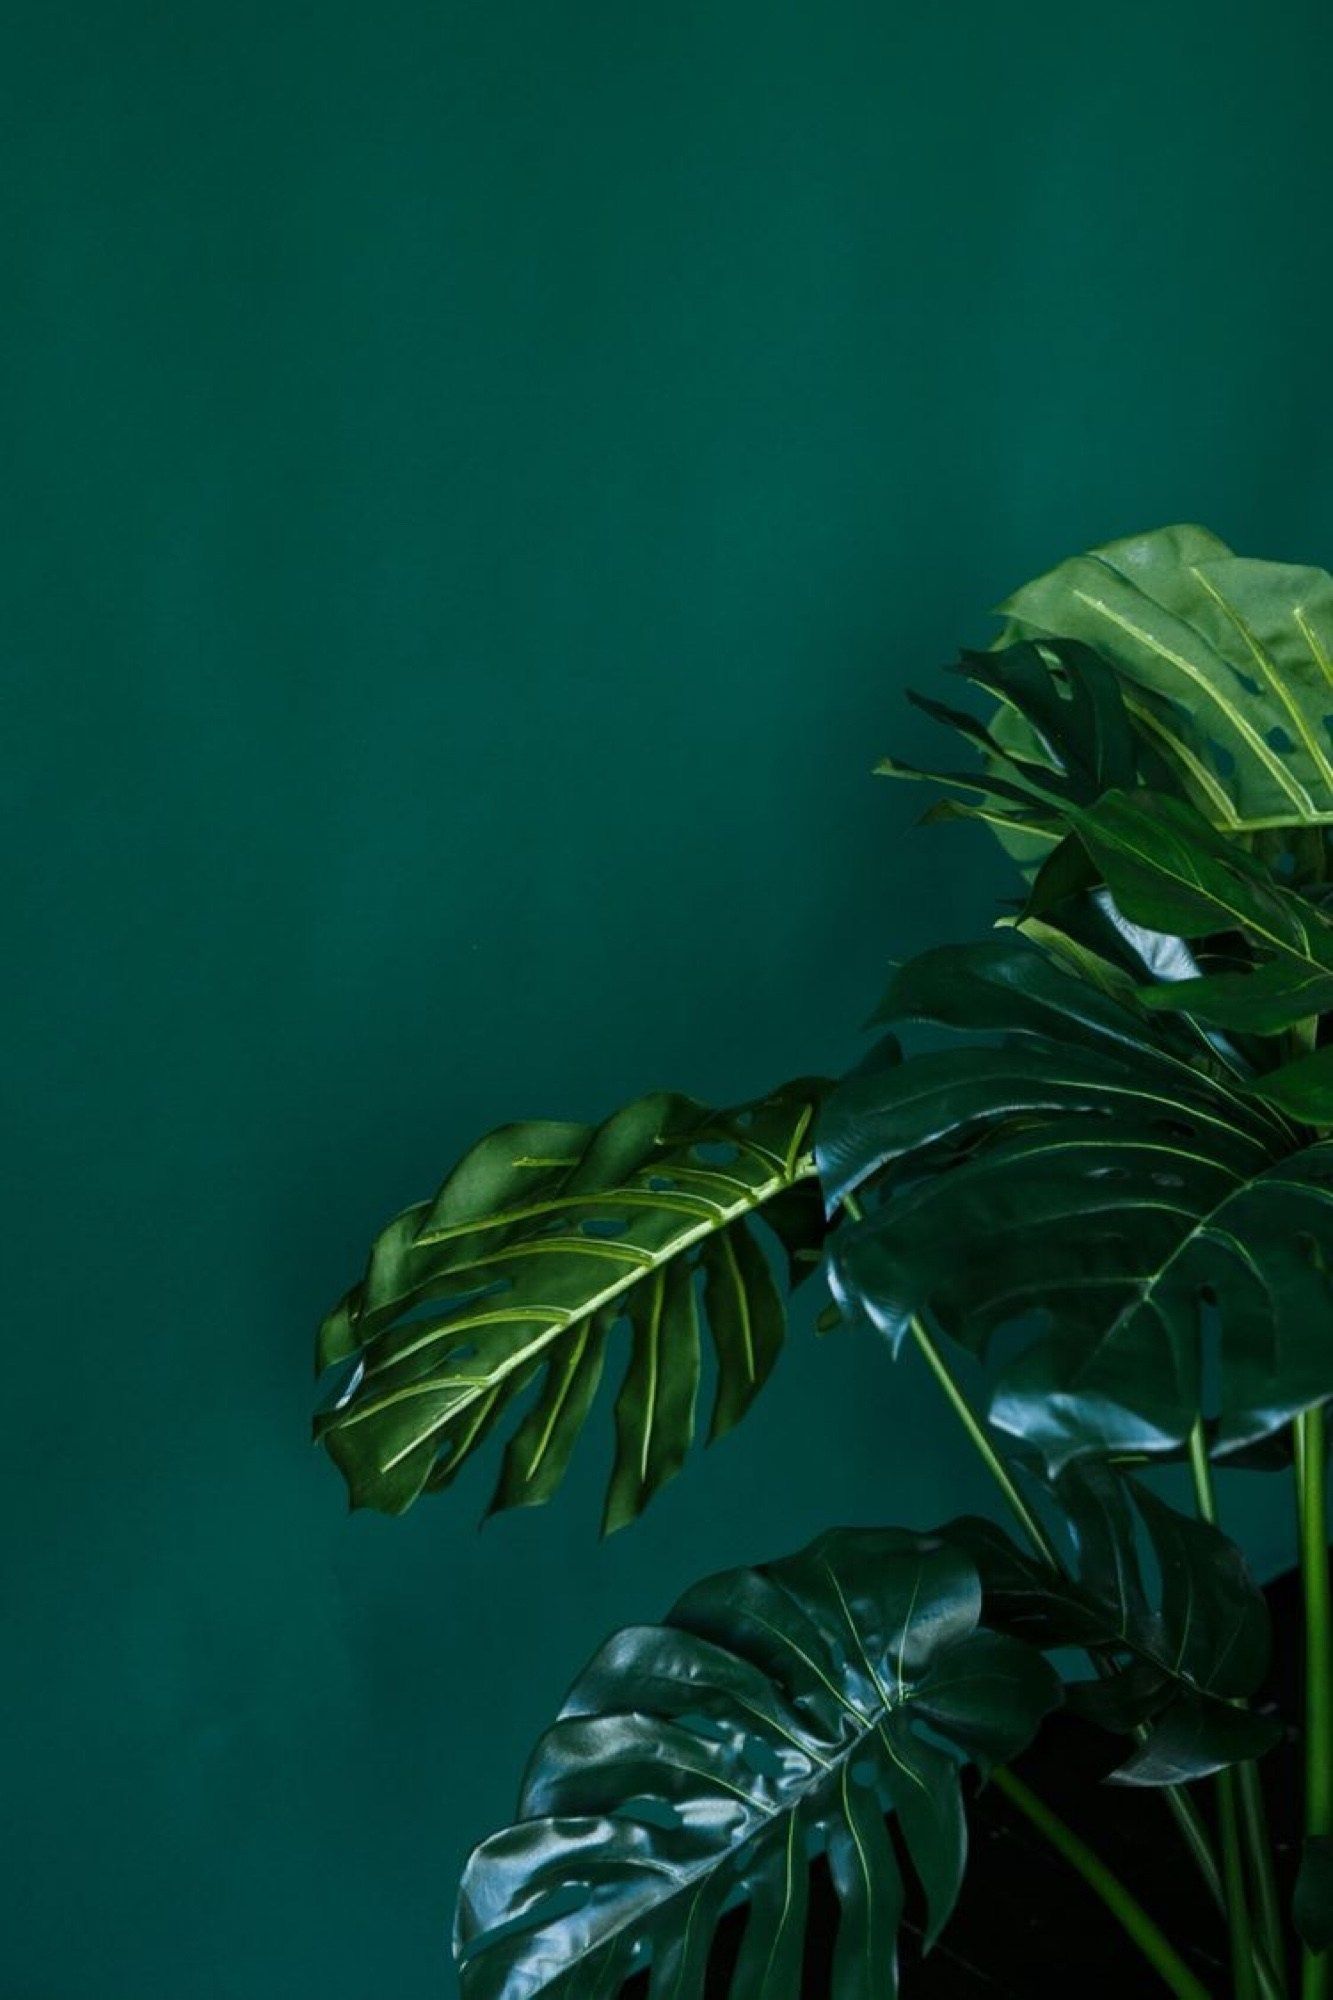 A green plant sitting in front of an aqua background - Green, plants, dark green, Monstera